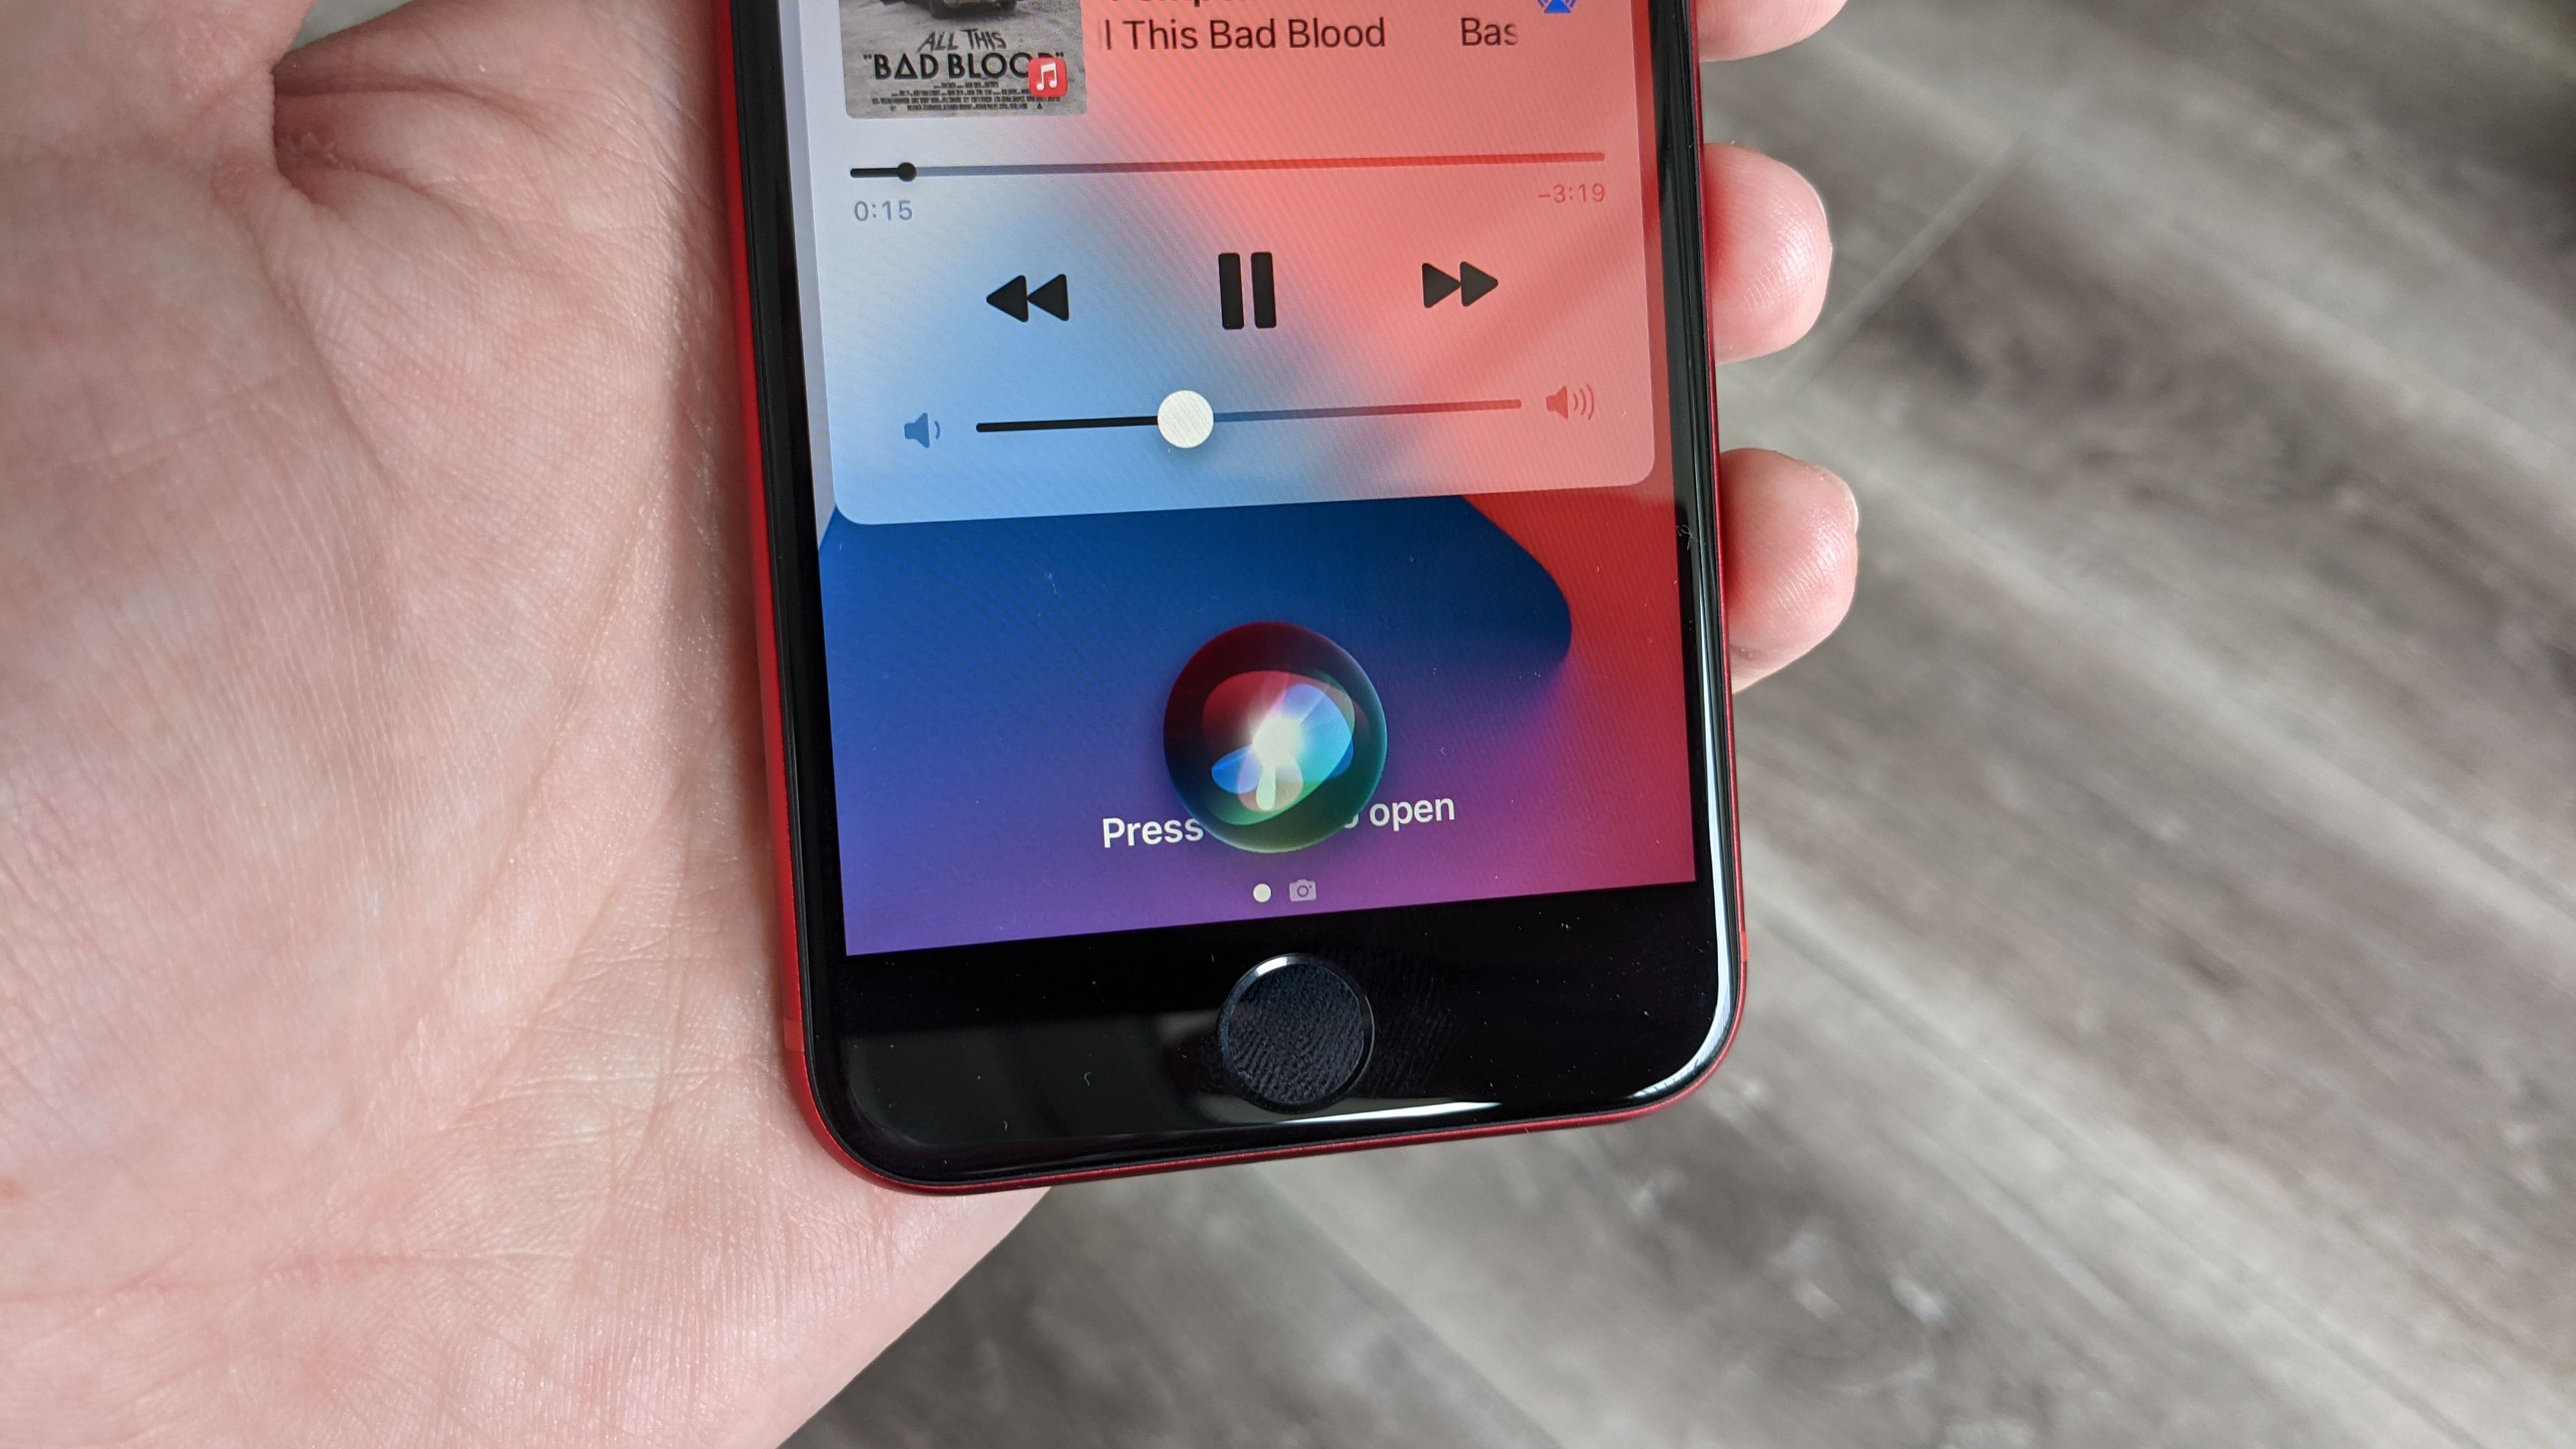 How to make AirPods louder with Siri step 1: During playback, say 